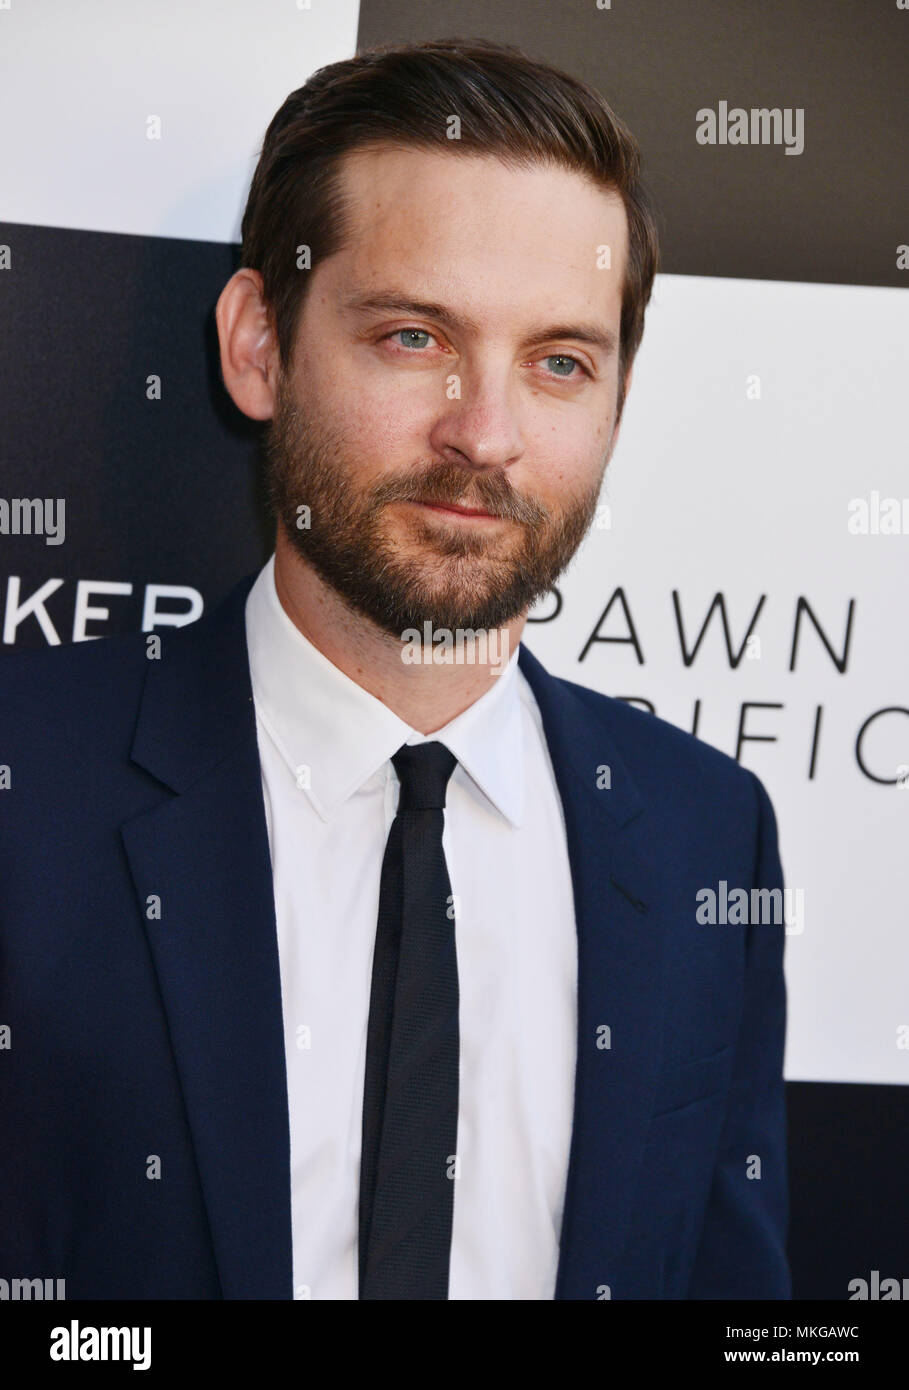 Premiere of 'Pawn Sacrifice' at Harmony Gold Theatre - Arrivals